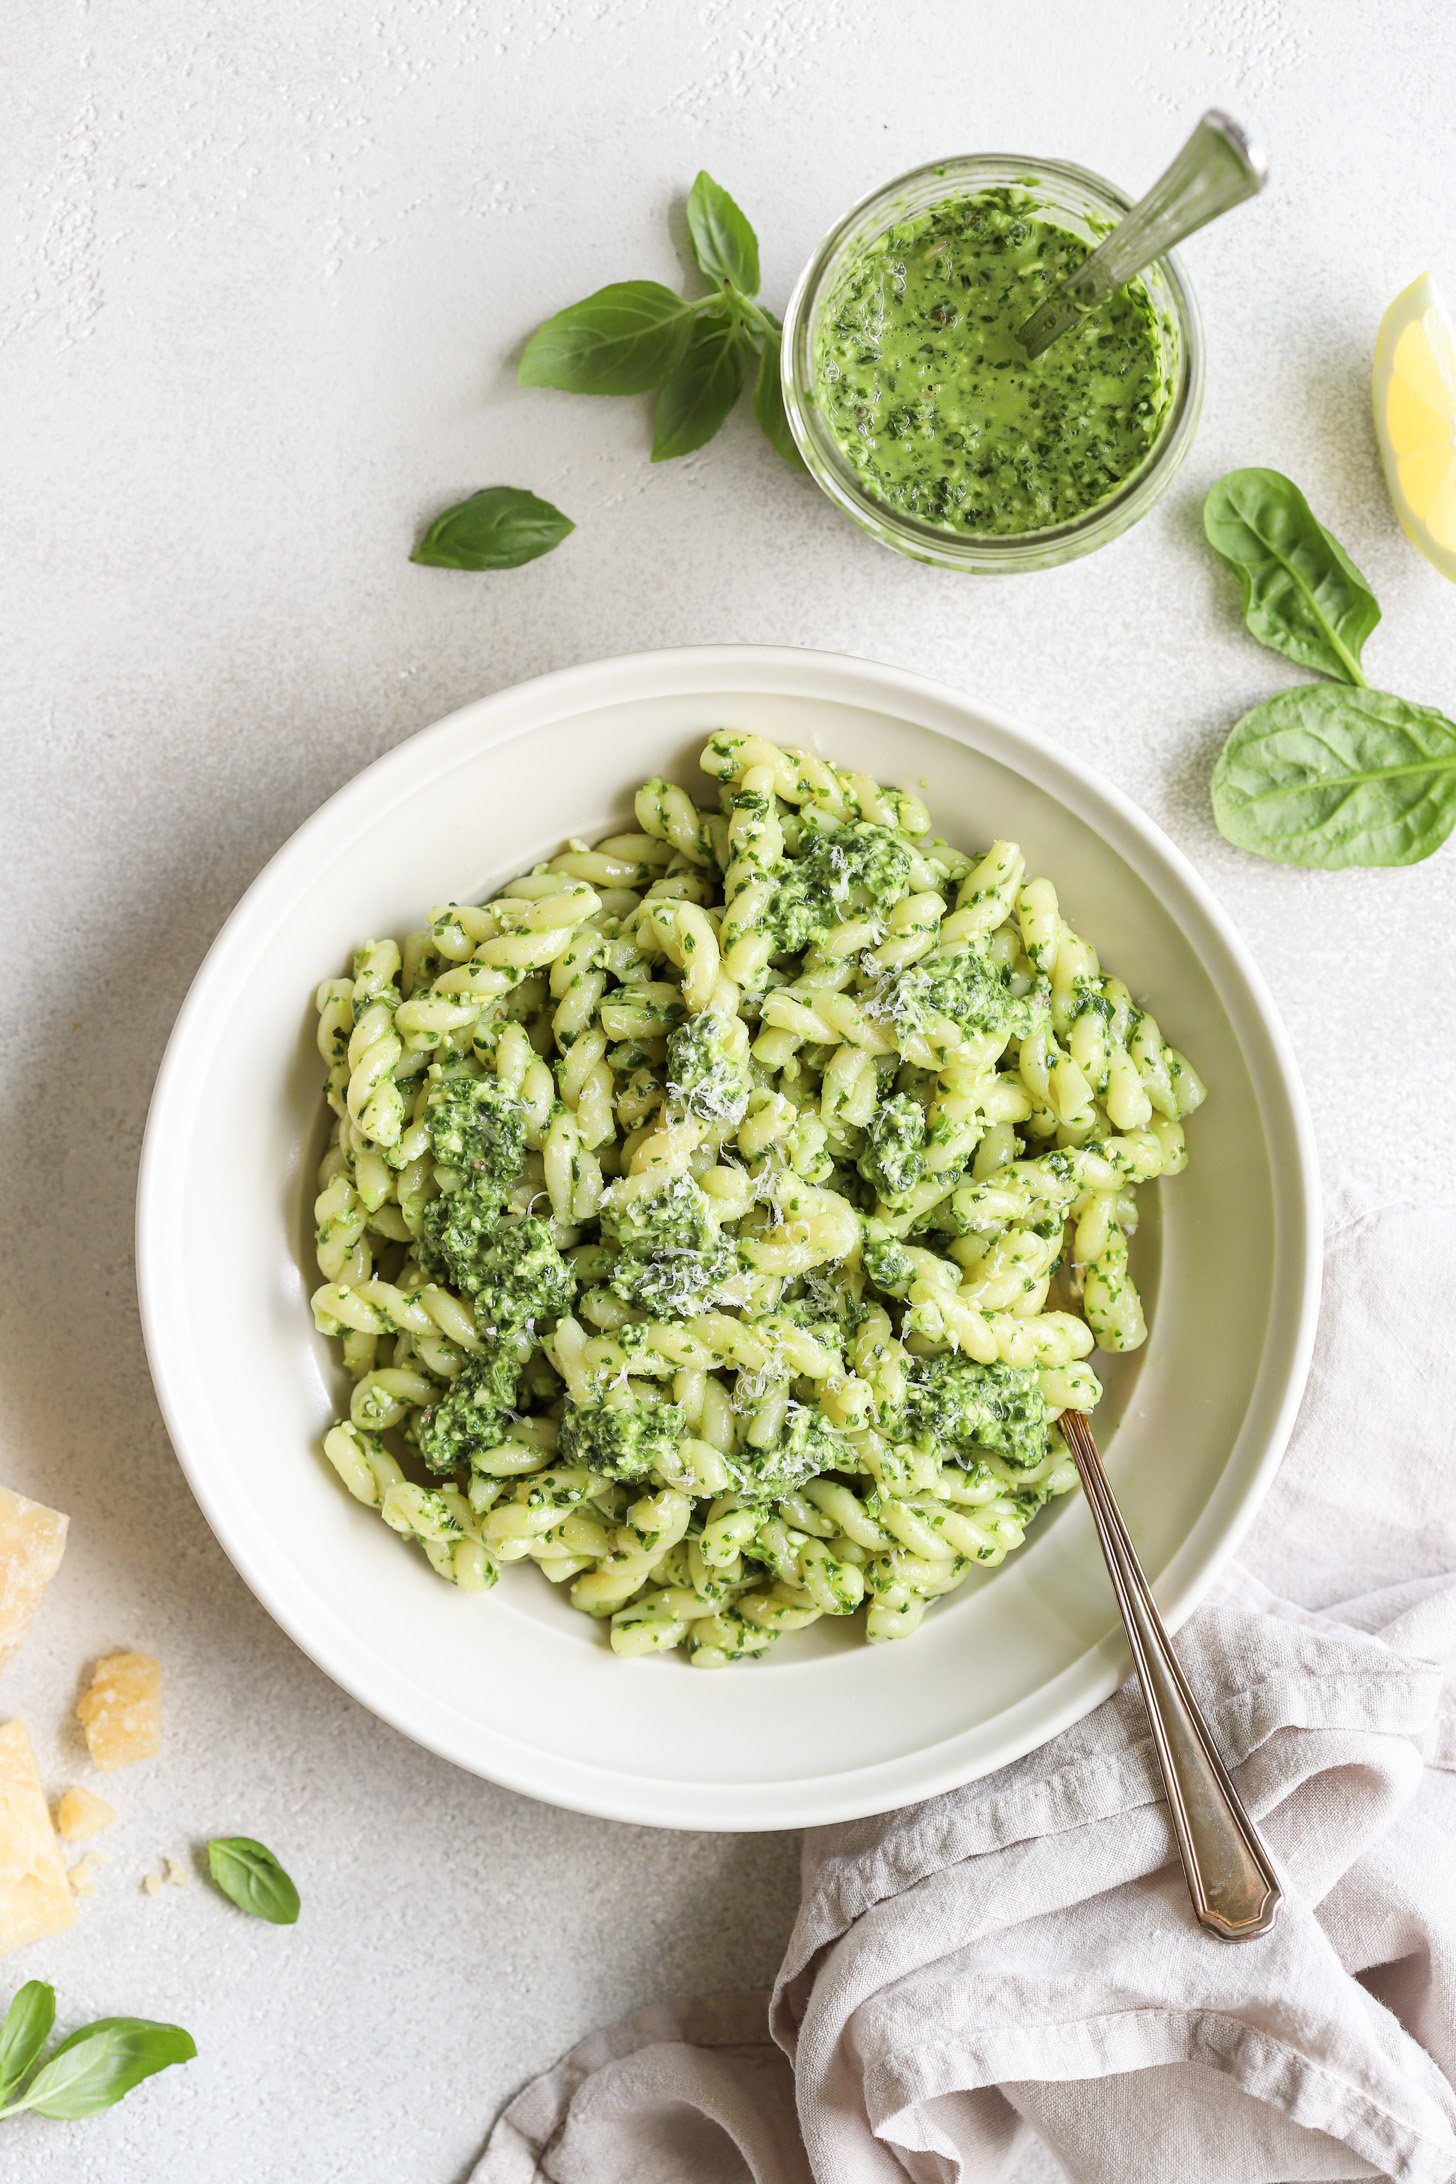 Spinach pesto tossed with cooked pasta in a white bowl with a fork. There is a white napkin, the jar with pesto, and ingredients from the pesto scattered around the bowl on the table.